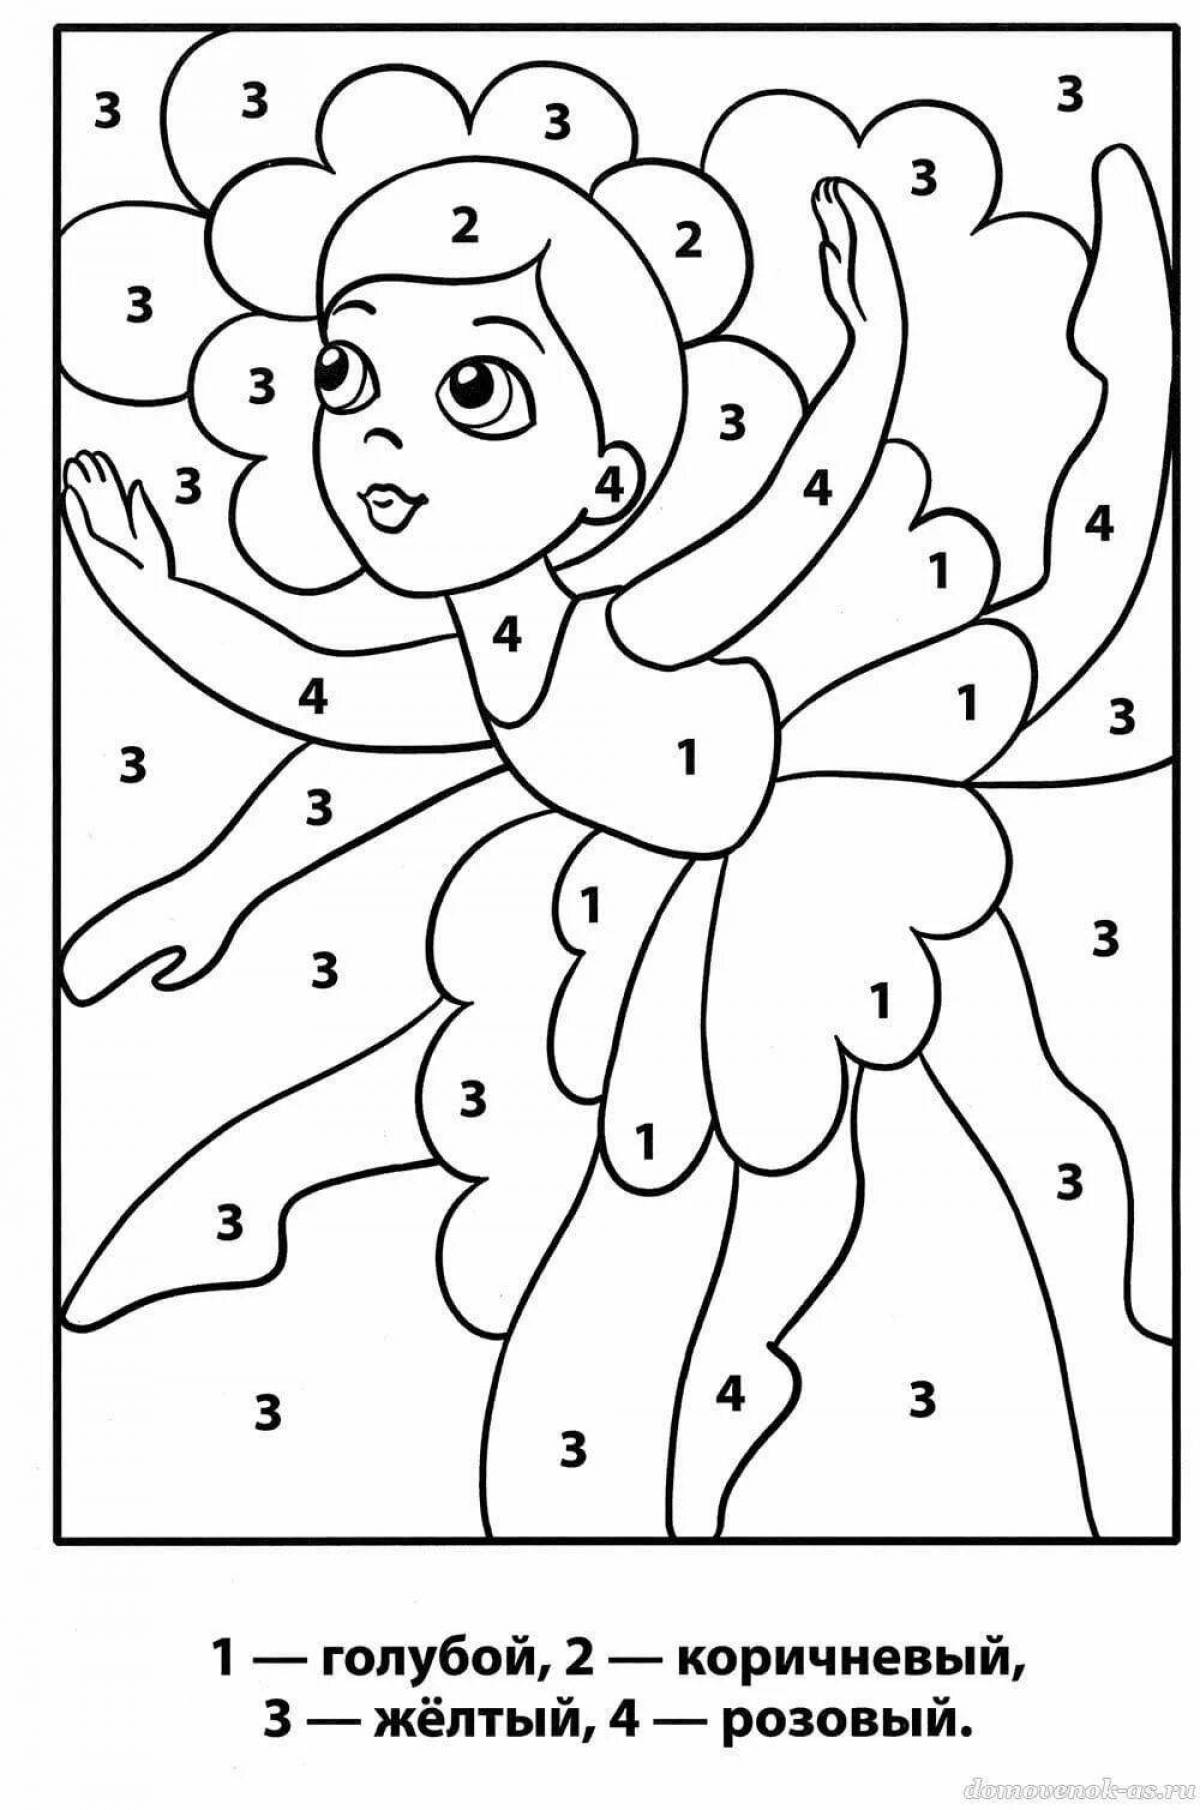 Intriguing coloring game for kids 4-6 years old